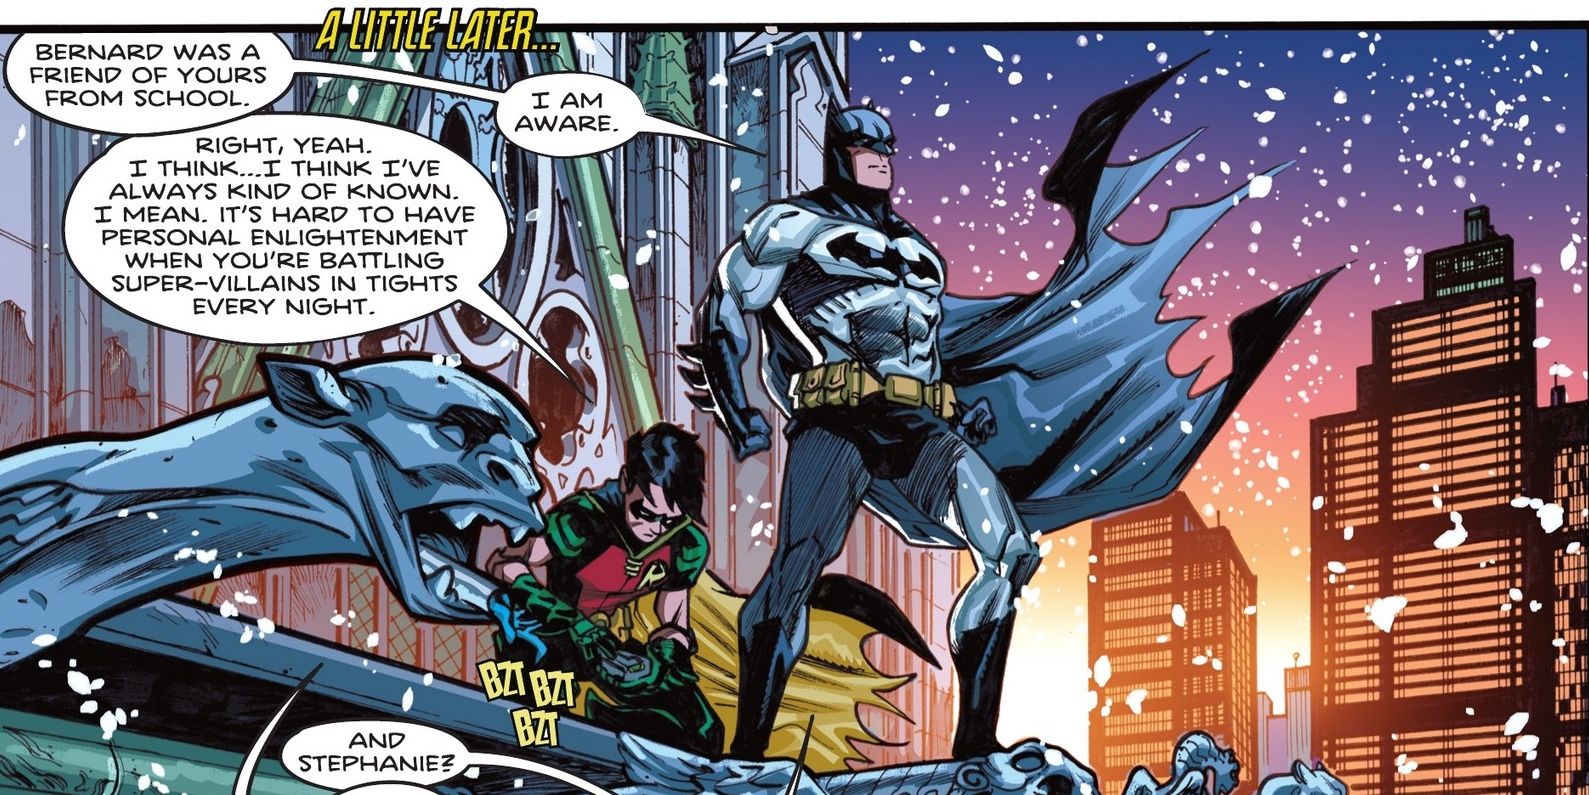 Tim Drake talks about his bisexuality with Batman